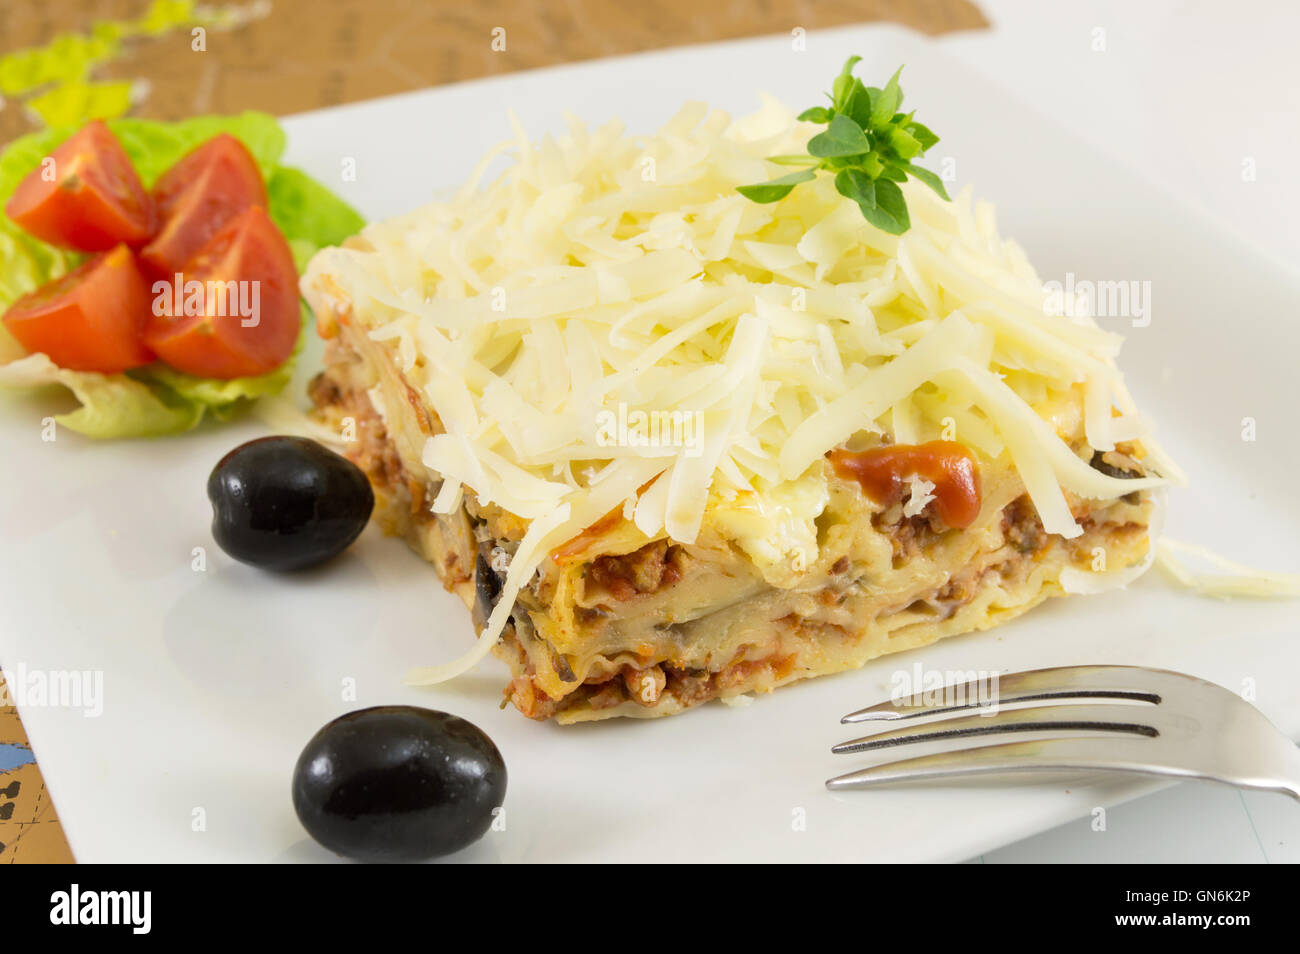 Lasagna portion with fresh vegetables on a plate Stock Photo